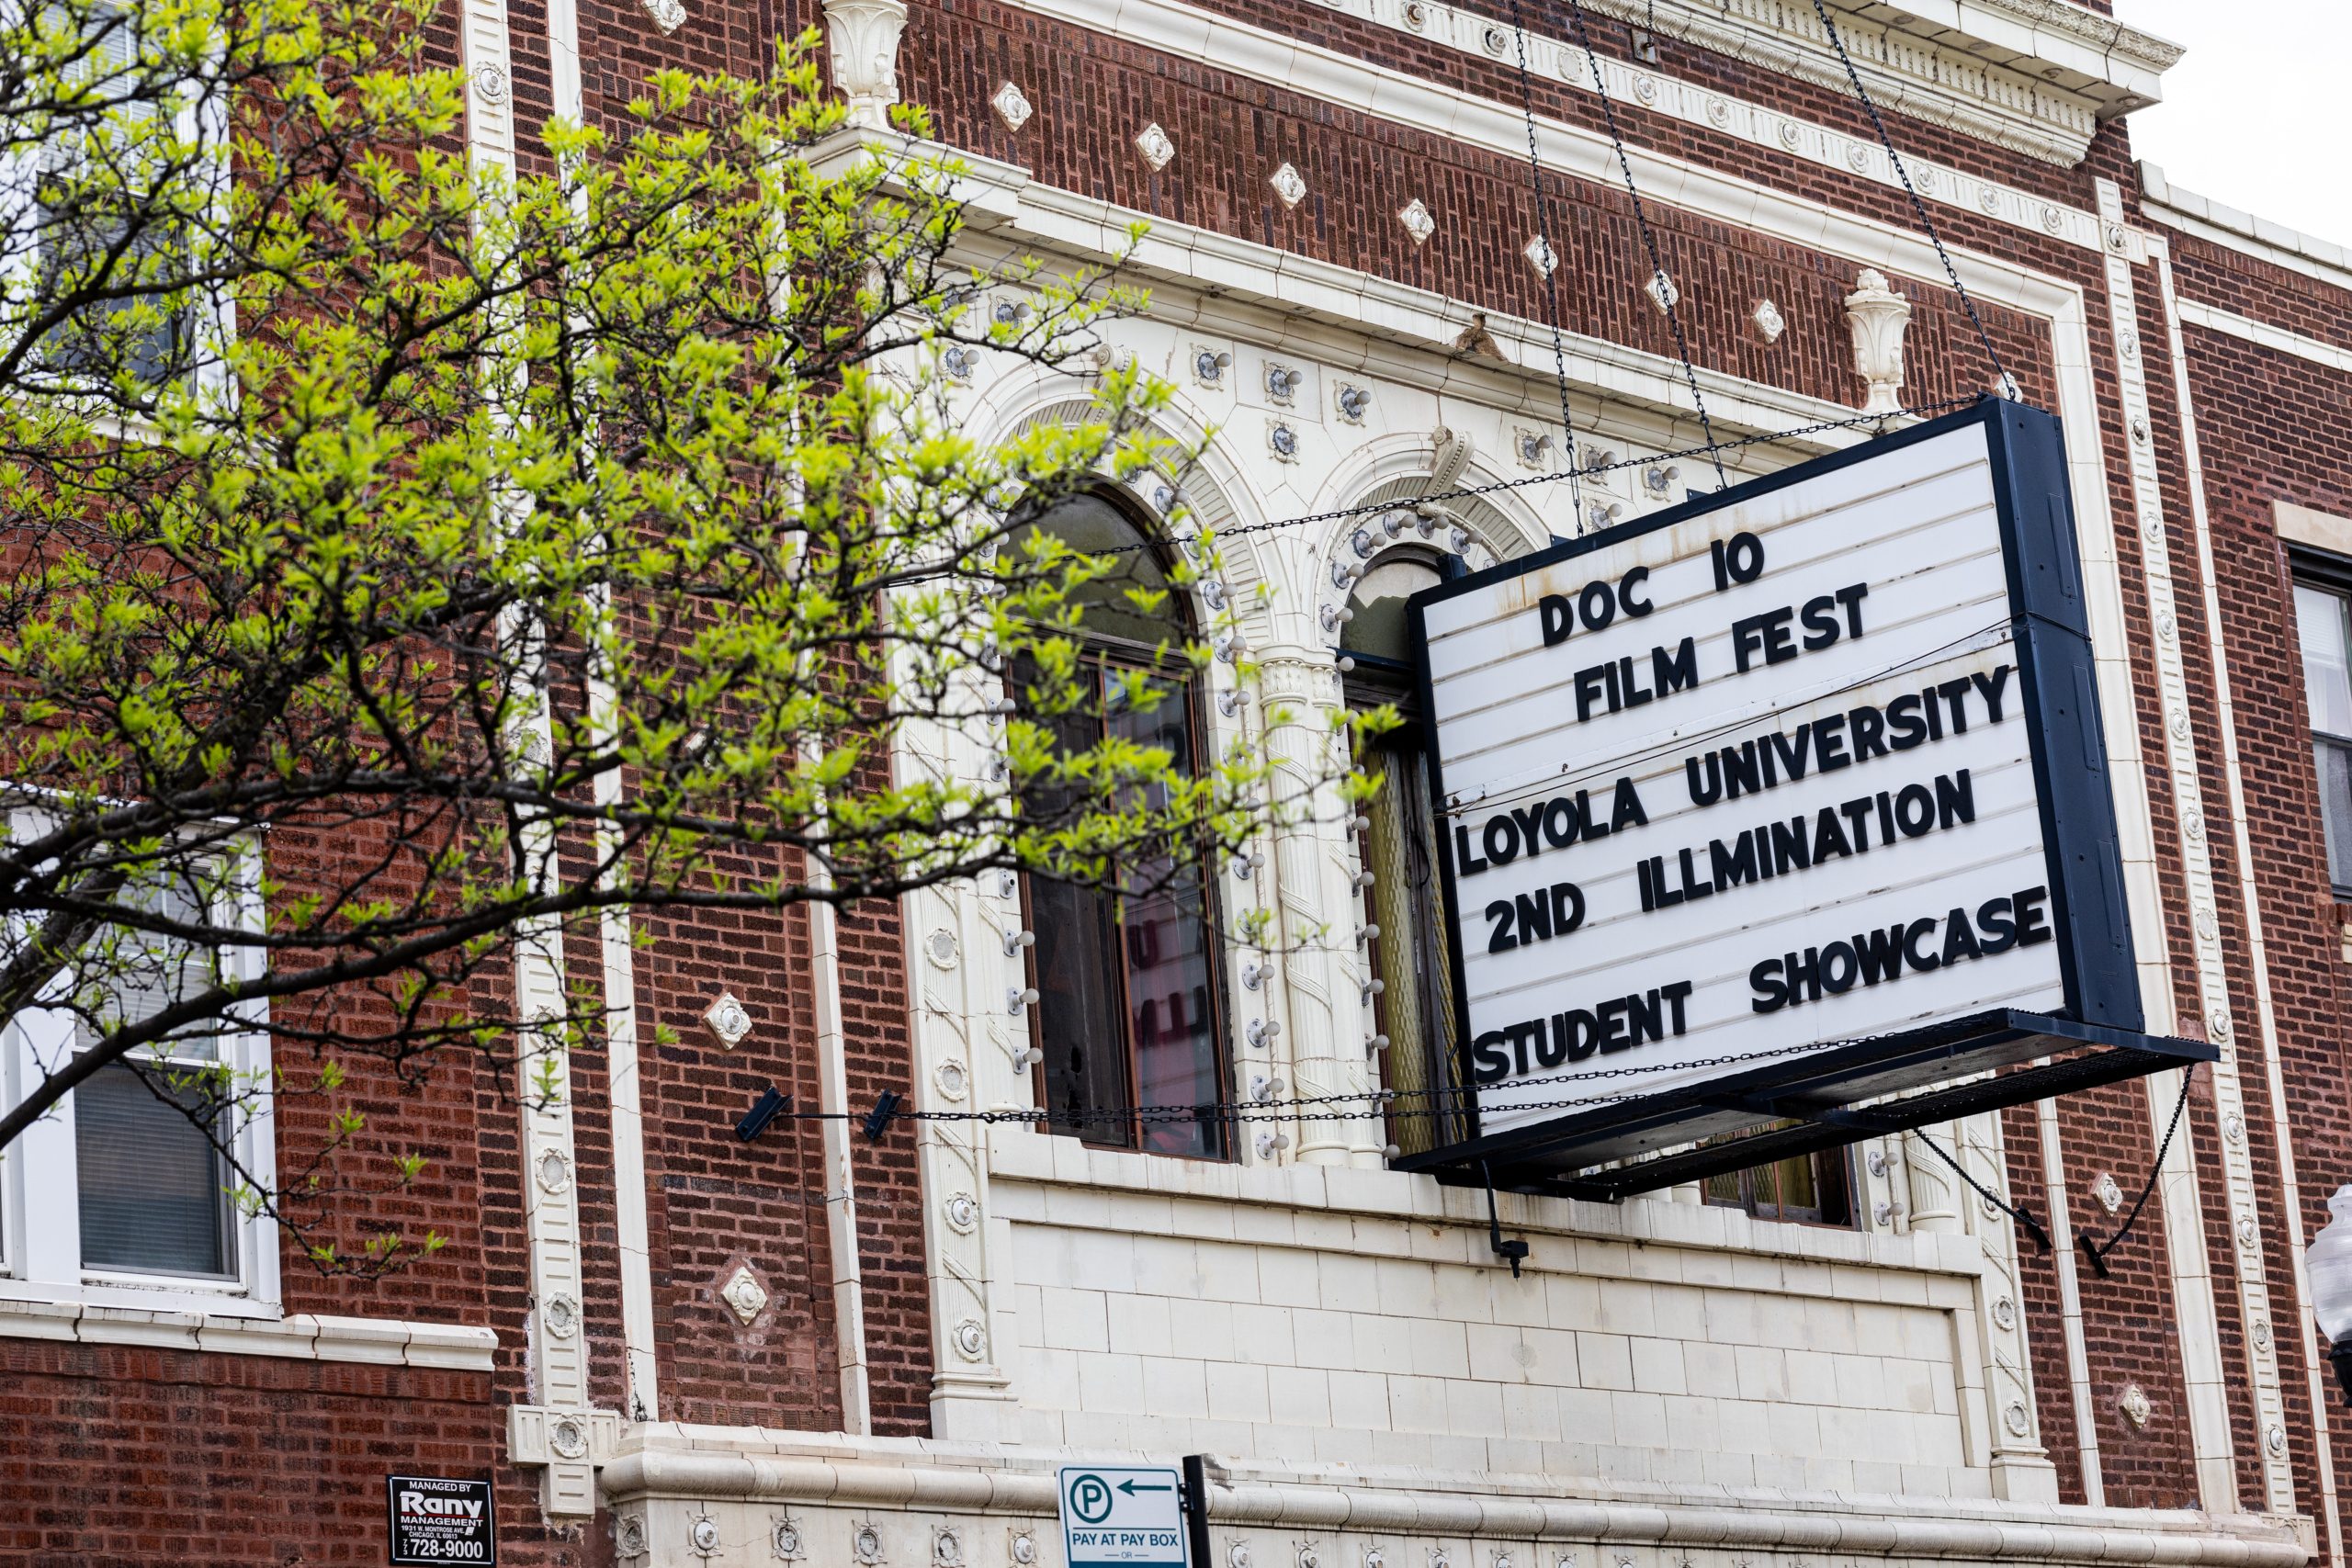 The School of Communication hosted its second annual Illumination Showcase event at the Davis Theater in Chicago.